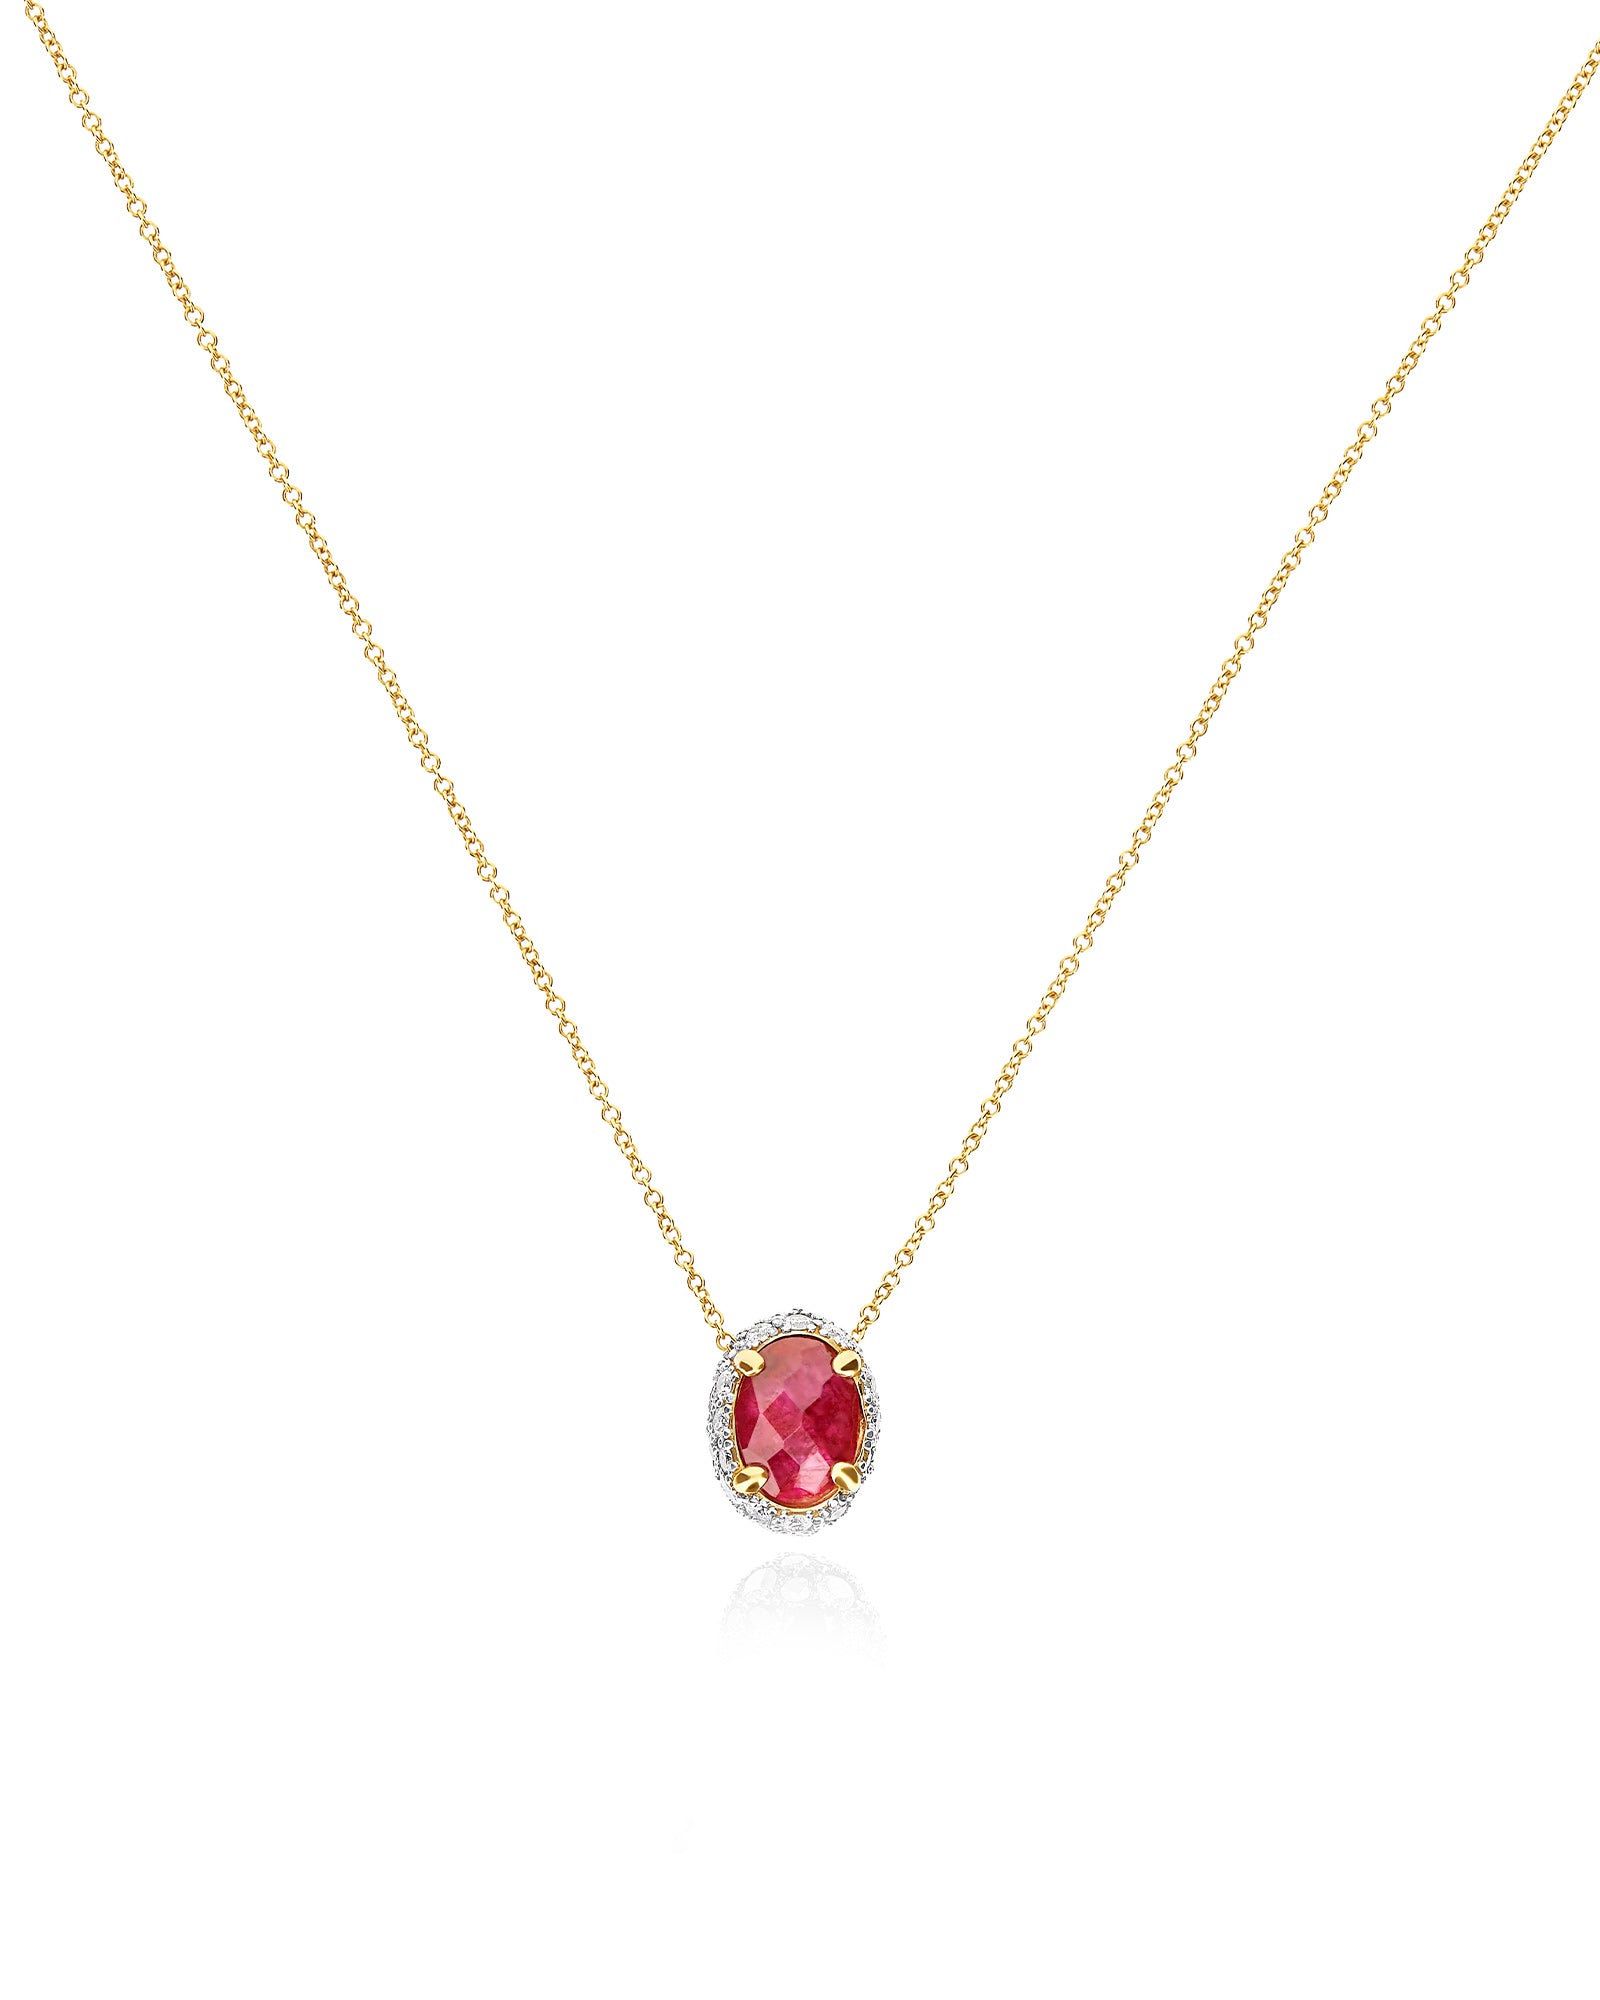 "Reverse" Gold, Diamonds and Ruby necklace